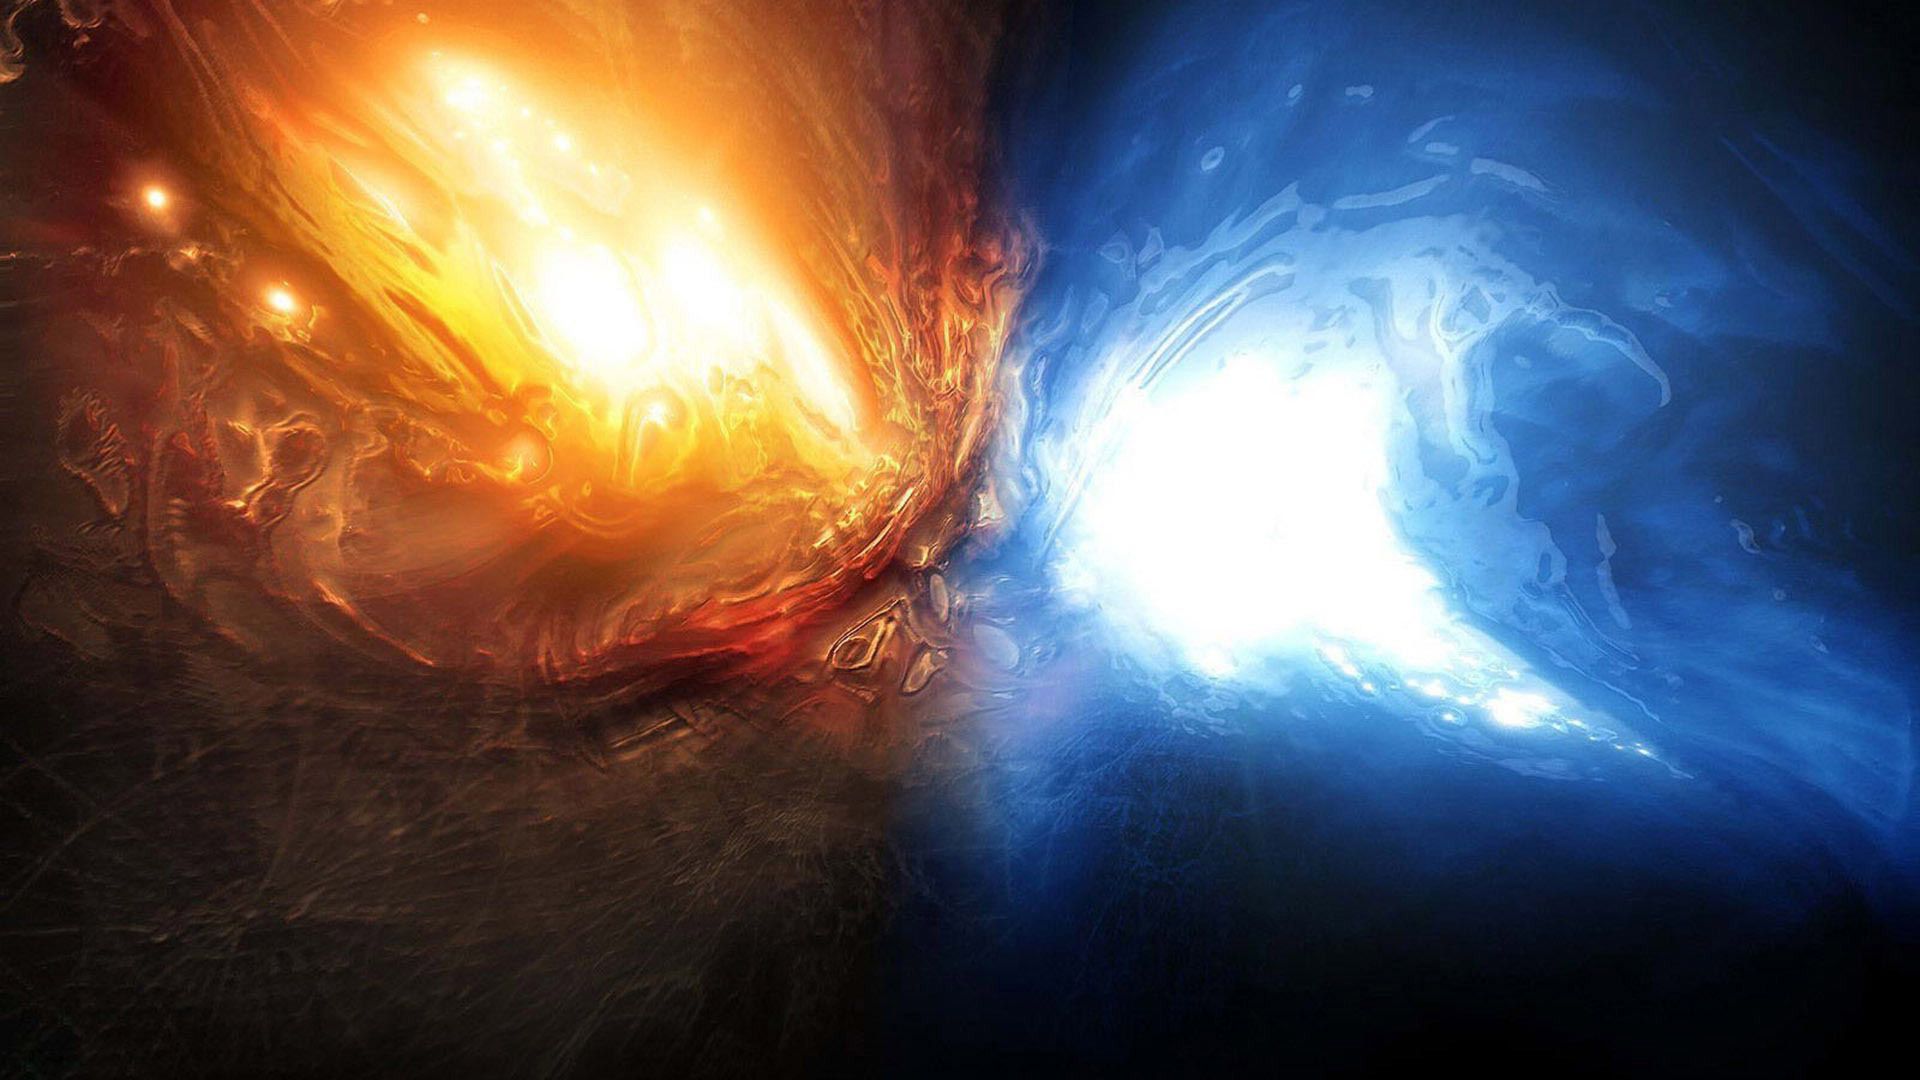 Fire Vs Ice Wallpaper Blue And Red